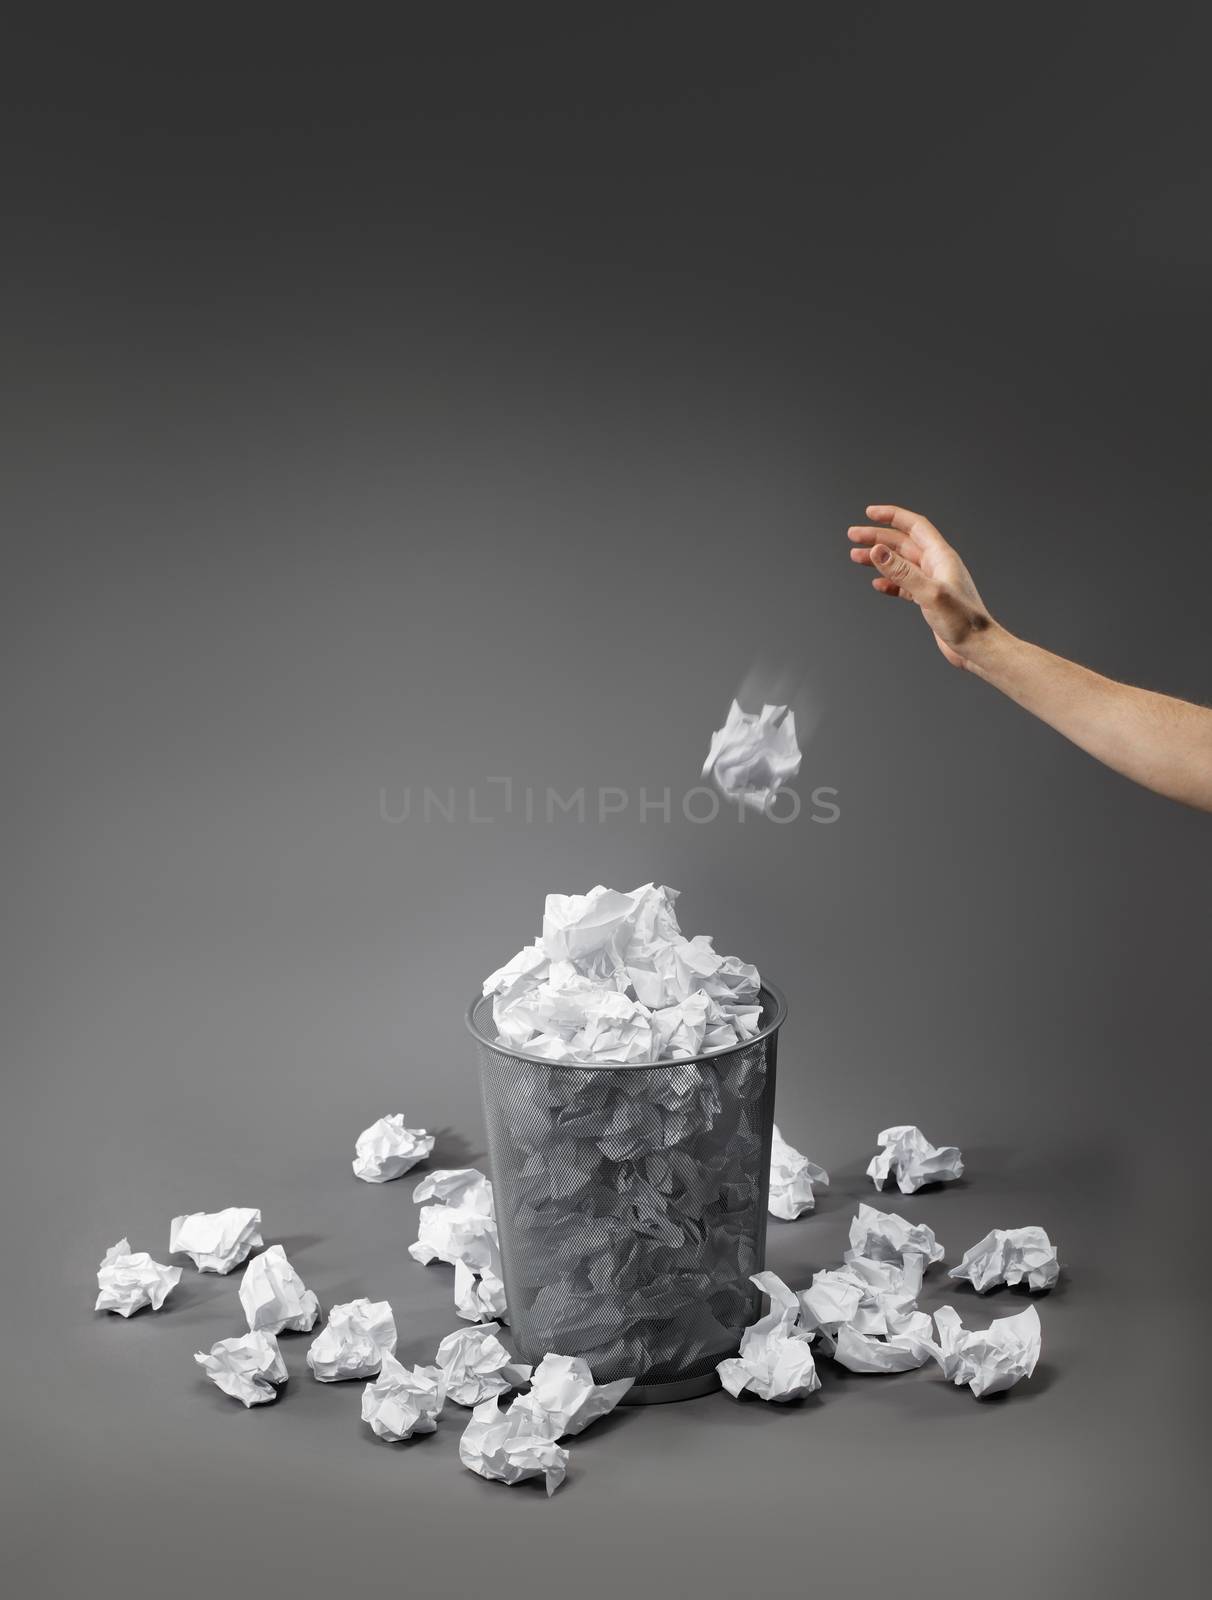 Hand throwing a crumpled paper into a waste paper basket.